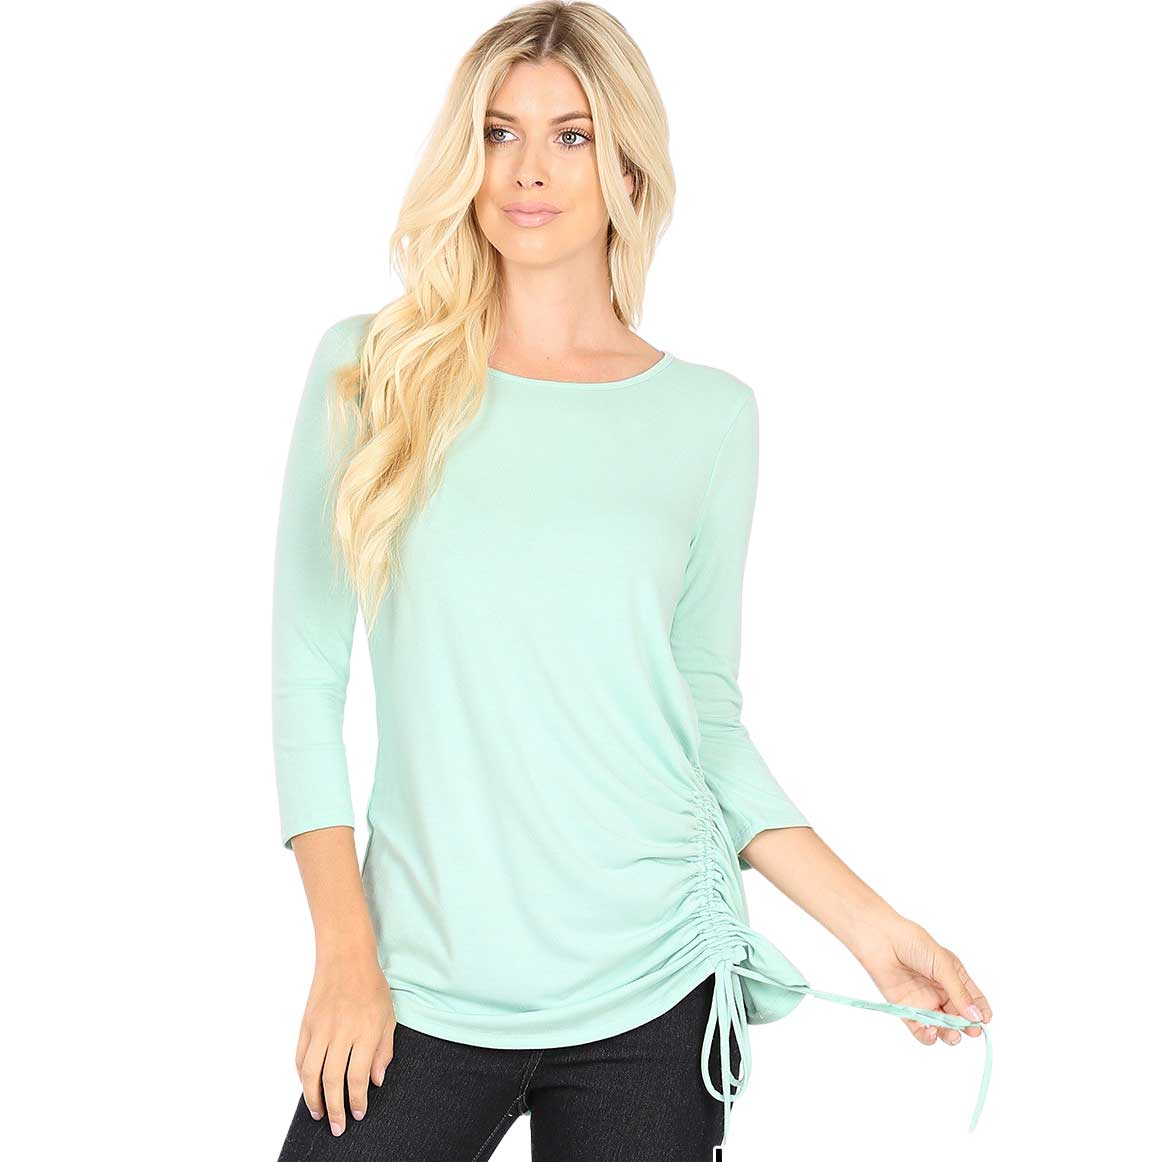 1887 - 3/4 Sleeve Ruched Tops DUSTY MINT 3/4 Sleeve Round Neck Side Ruched 1887 - Small